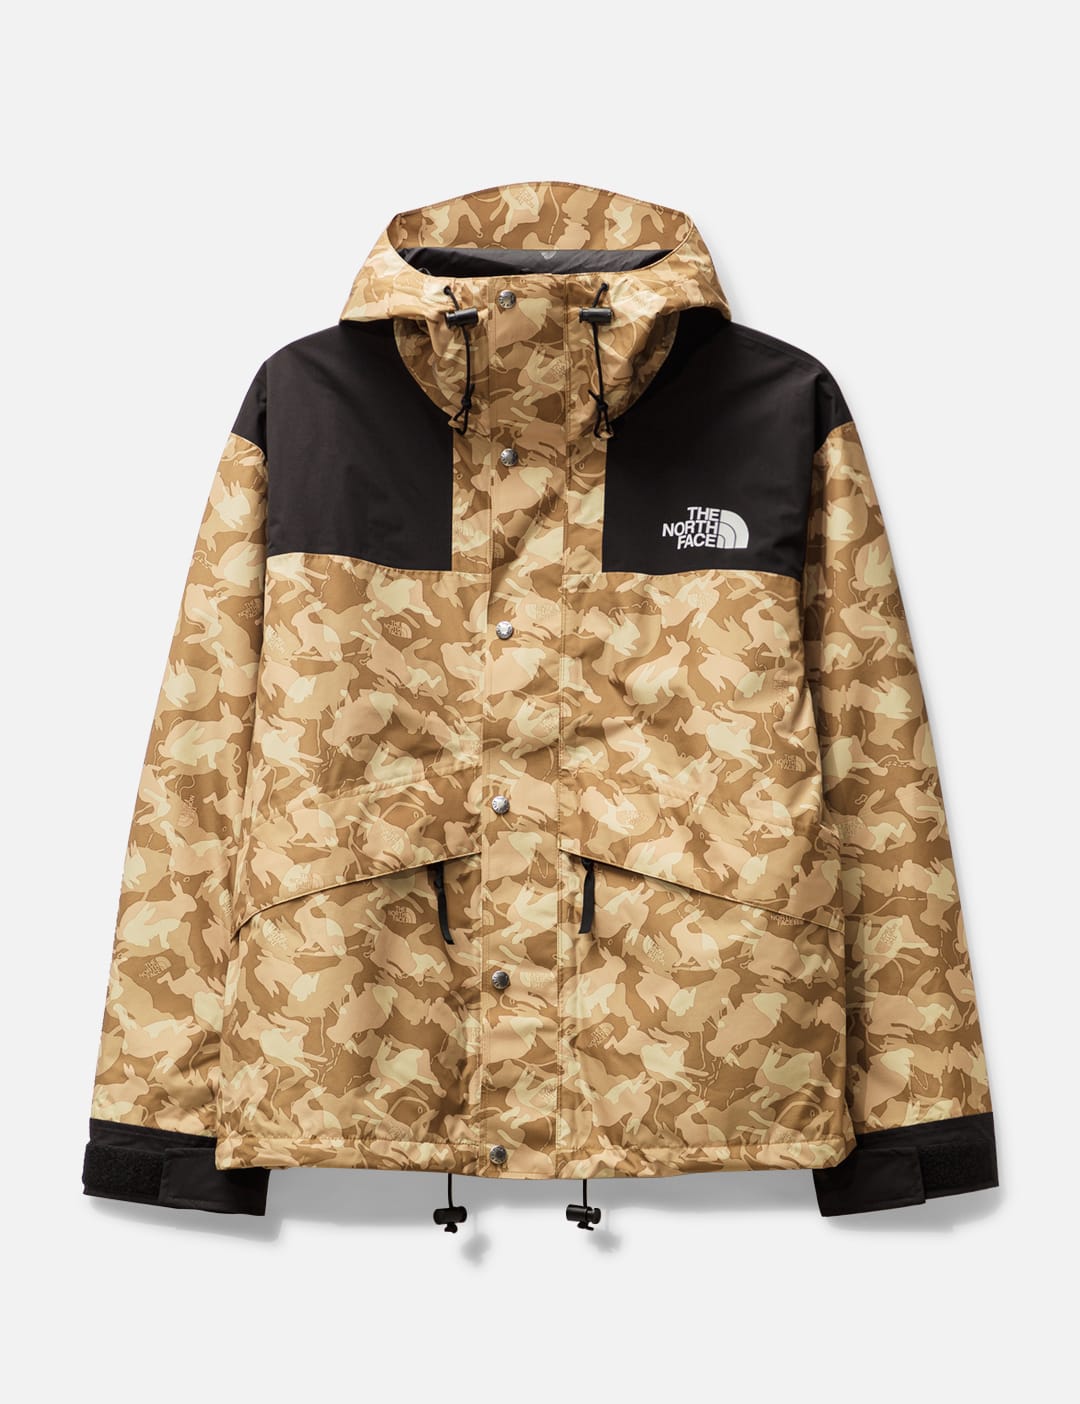 The North Face M 86 RETRO MOUNTAIN JACKET